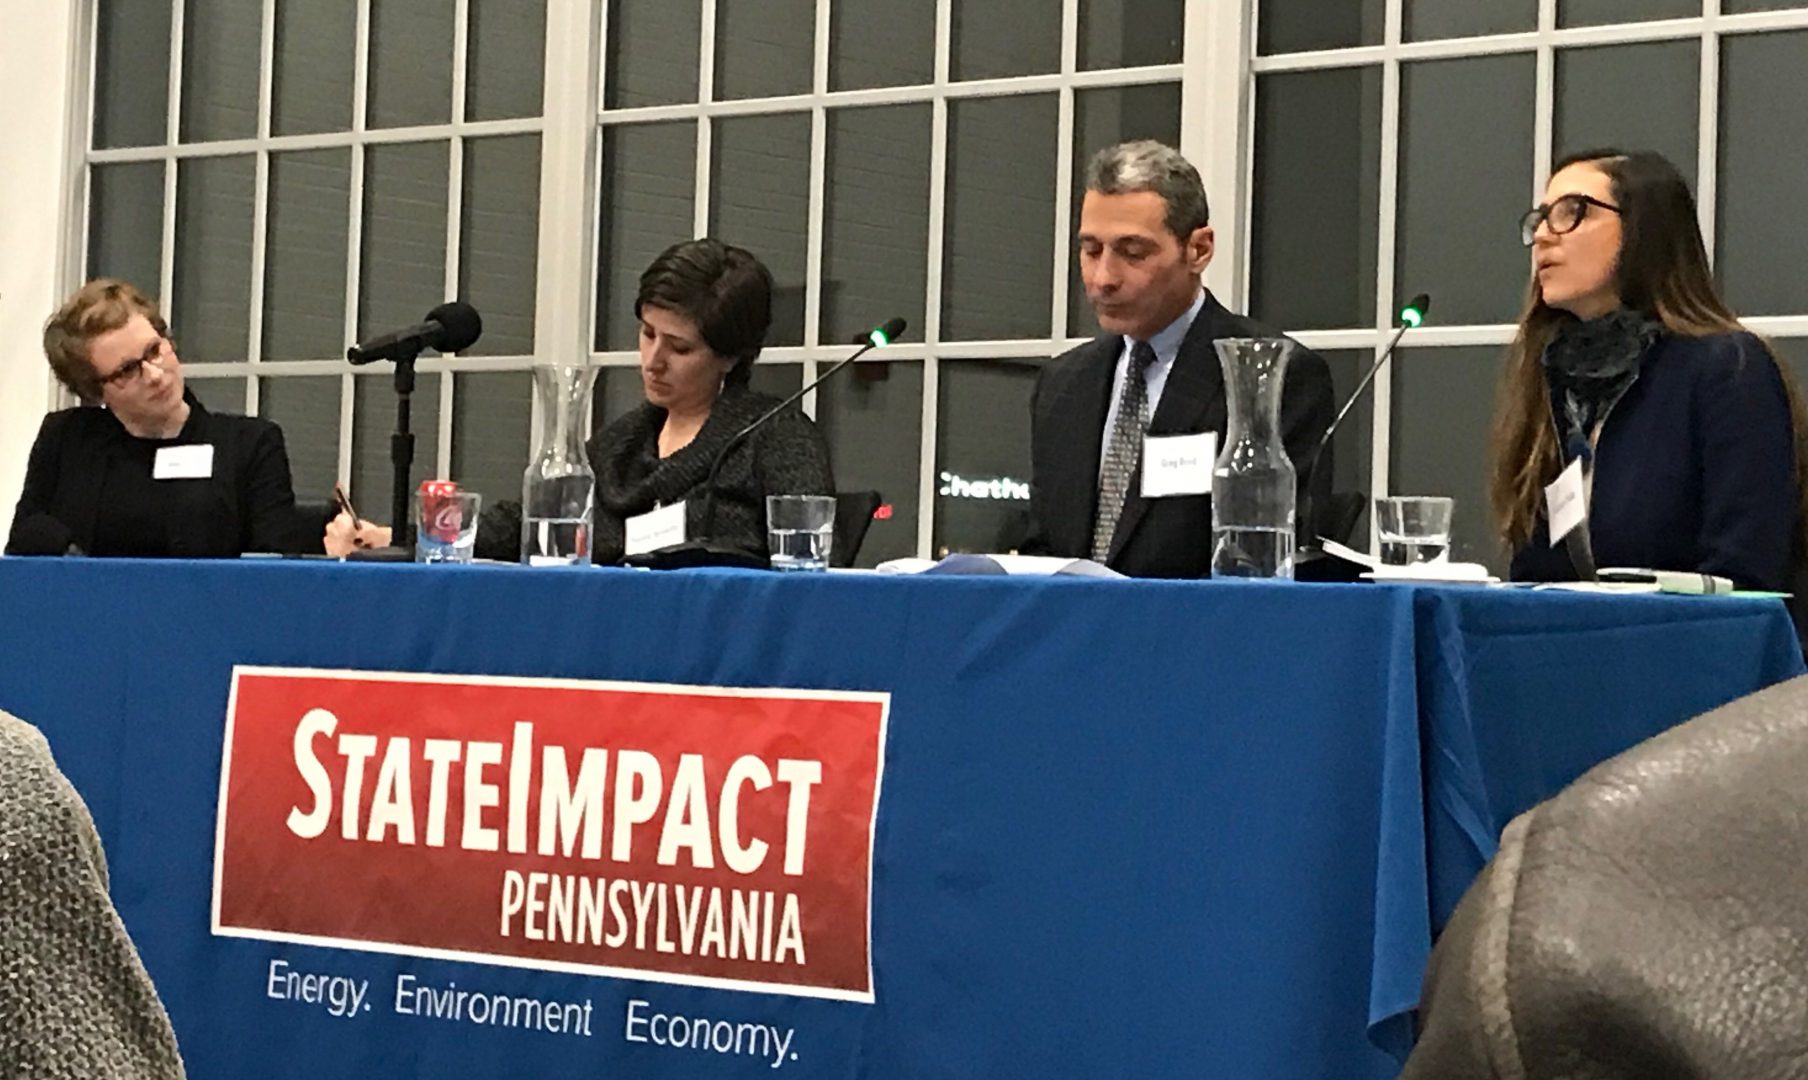 StateImpact Pennsylvania reporter Amy Sisk, left, with panelists Paulina Jaramillo, Greg Reed and Ivonne Peña at a public event in Pittsburgh Tuesday Jan. 29 called 